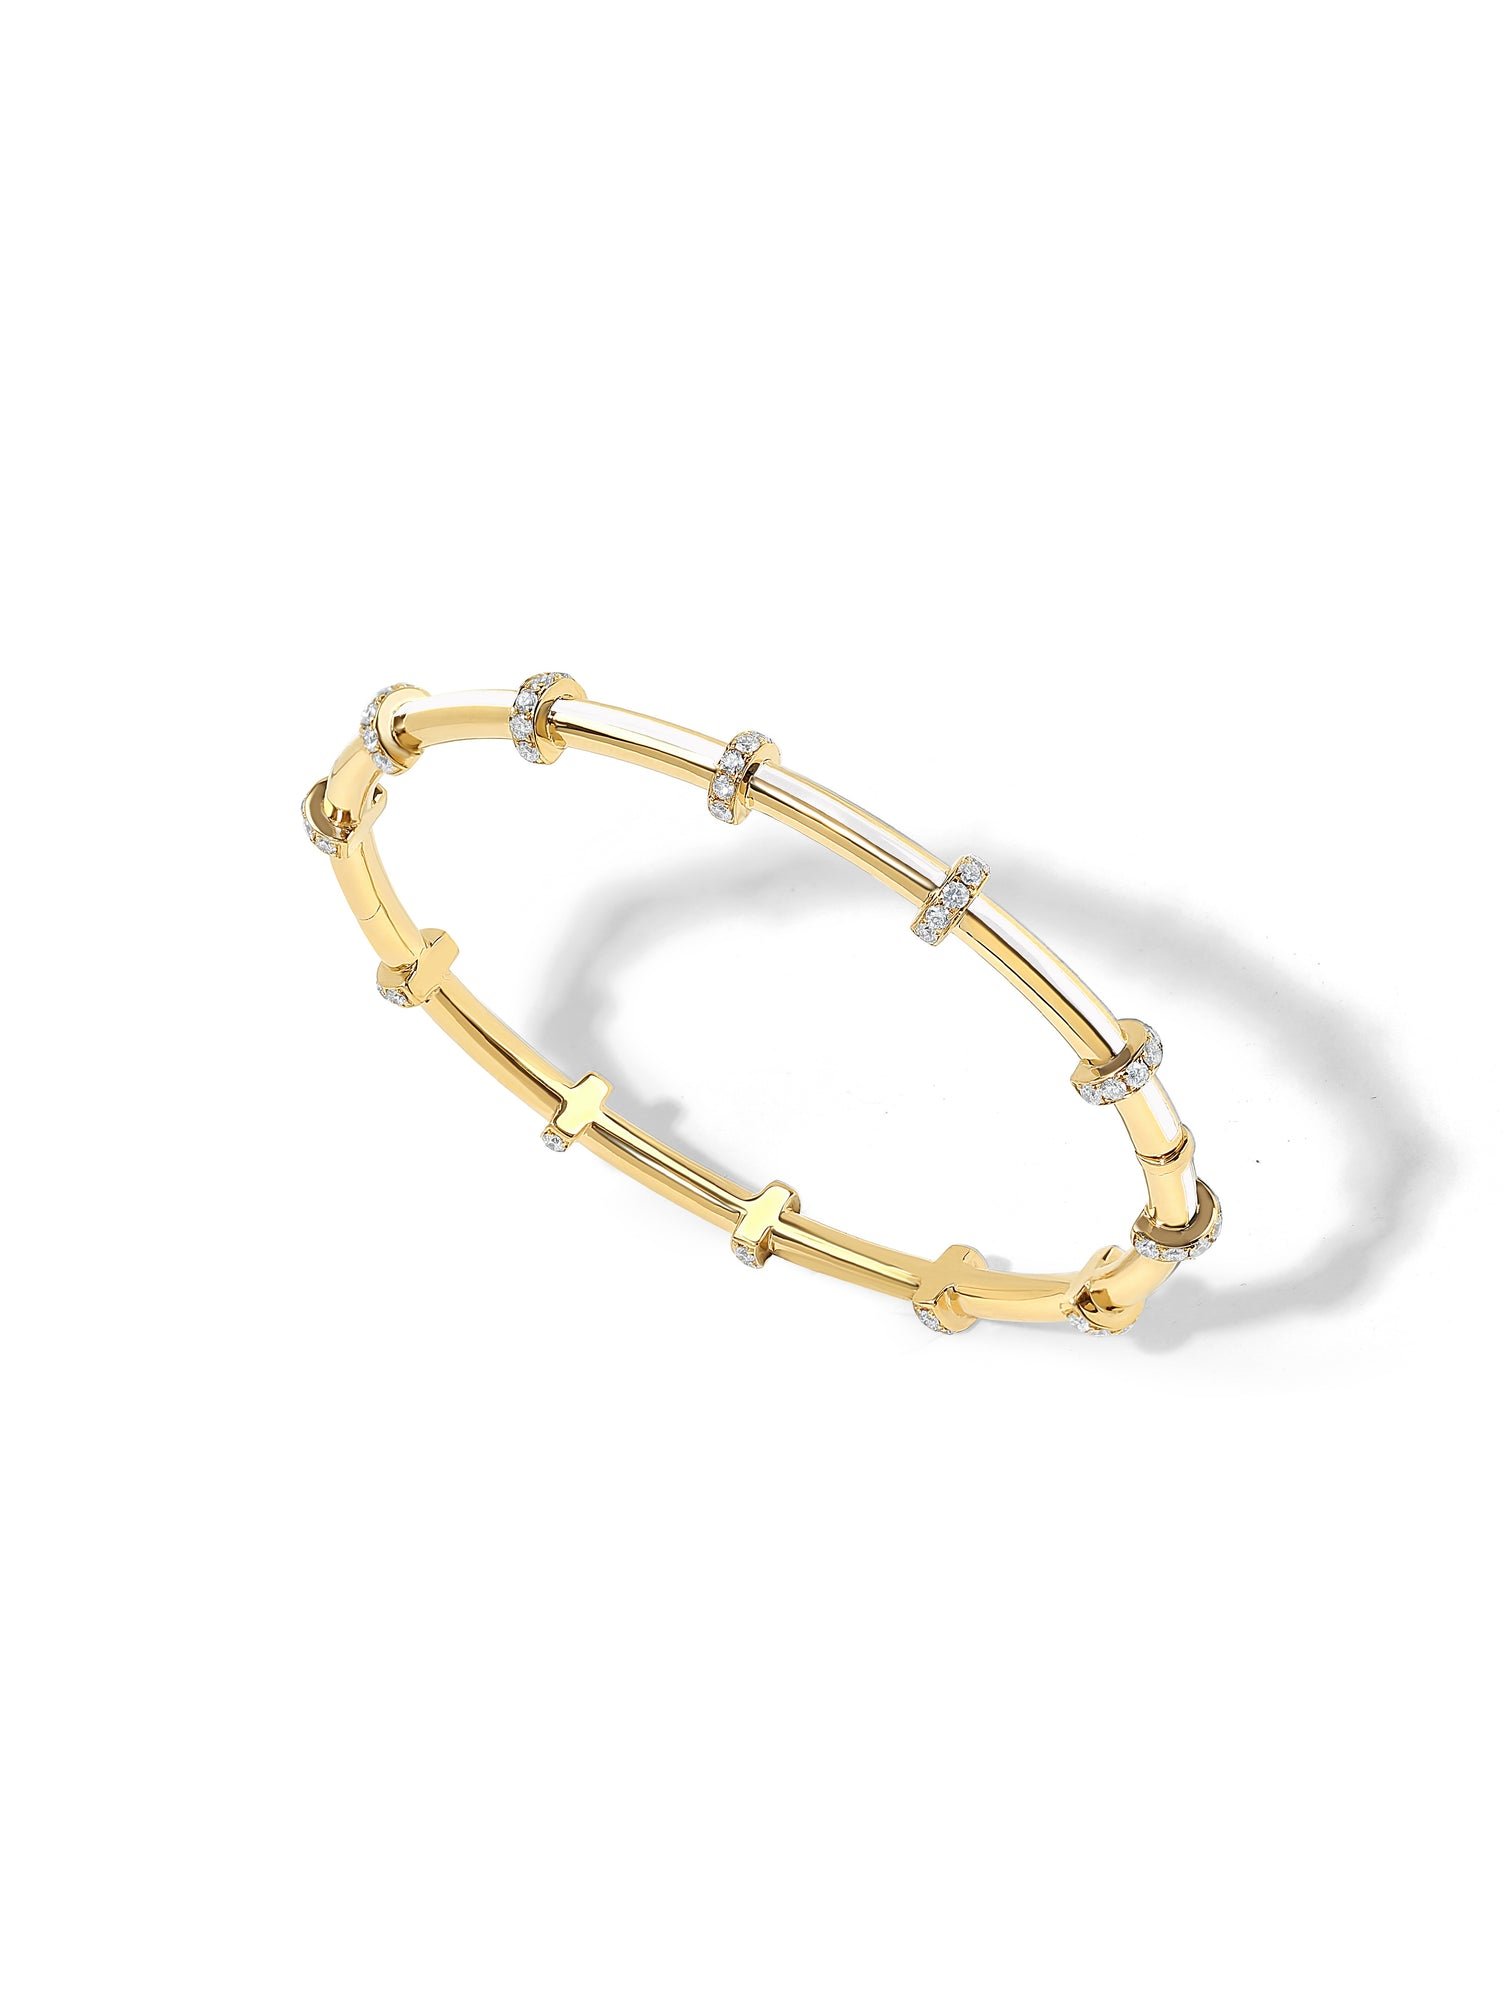 Buy Shining Gold Bracelet For Mens And Womens Daily Wear BRAC415